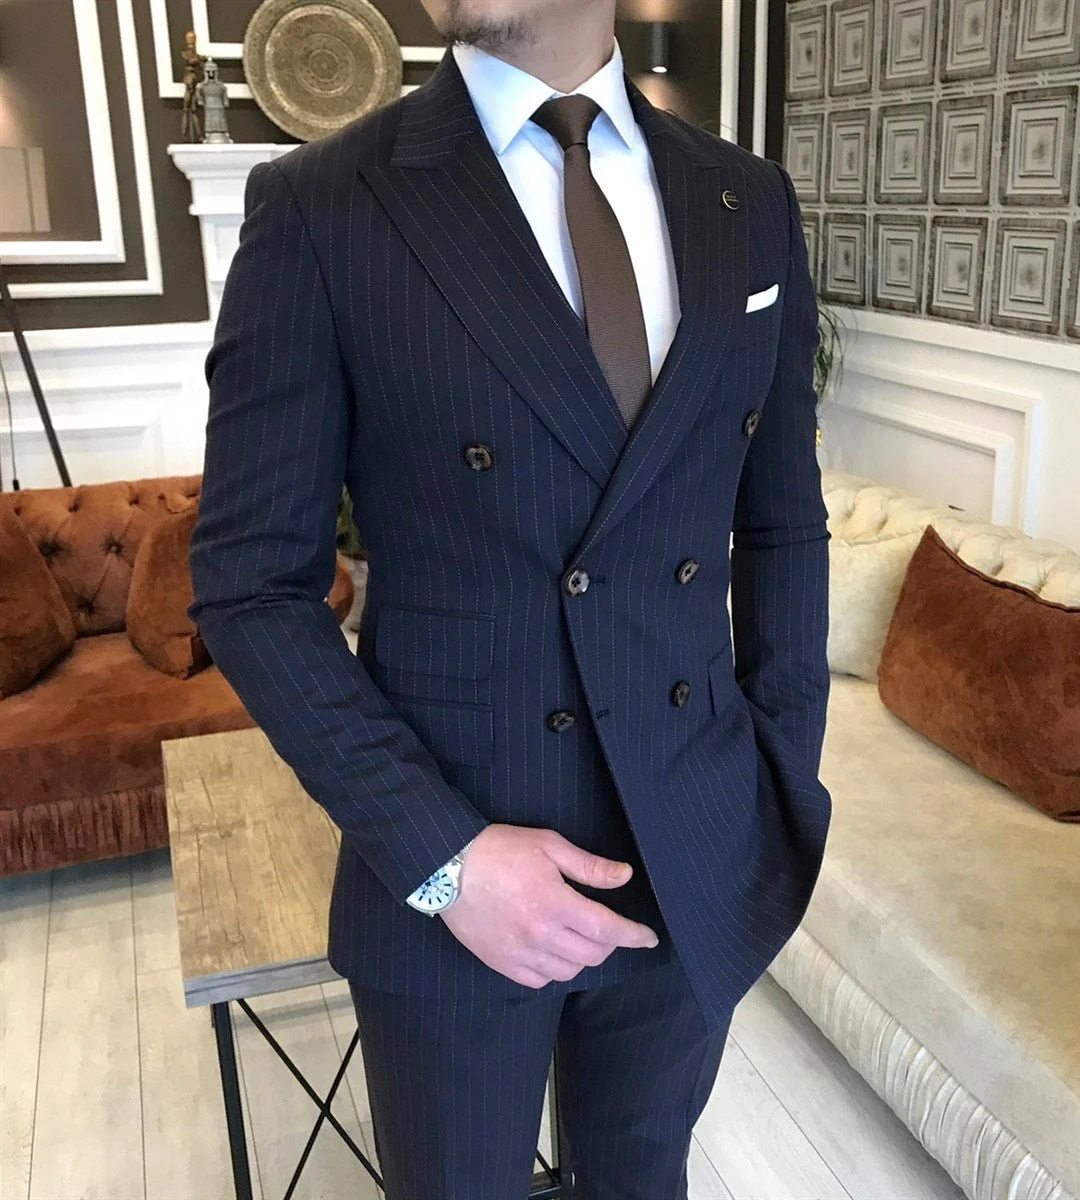 Navy double-breasted suit with peak lapels and white dress shirt